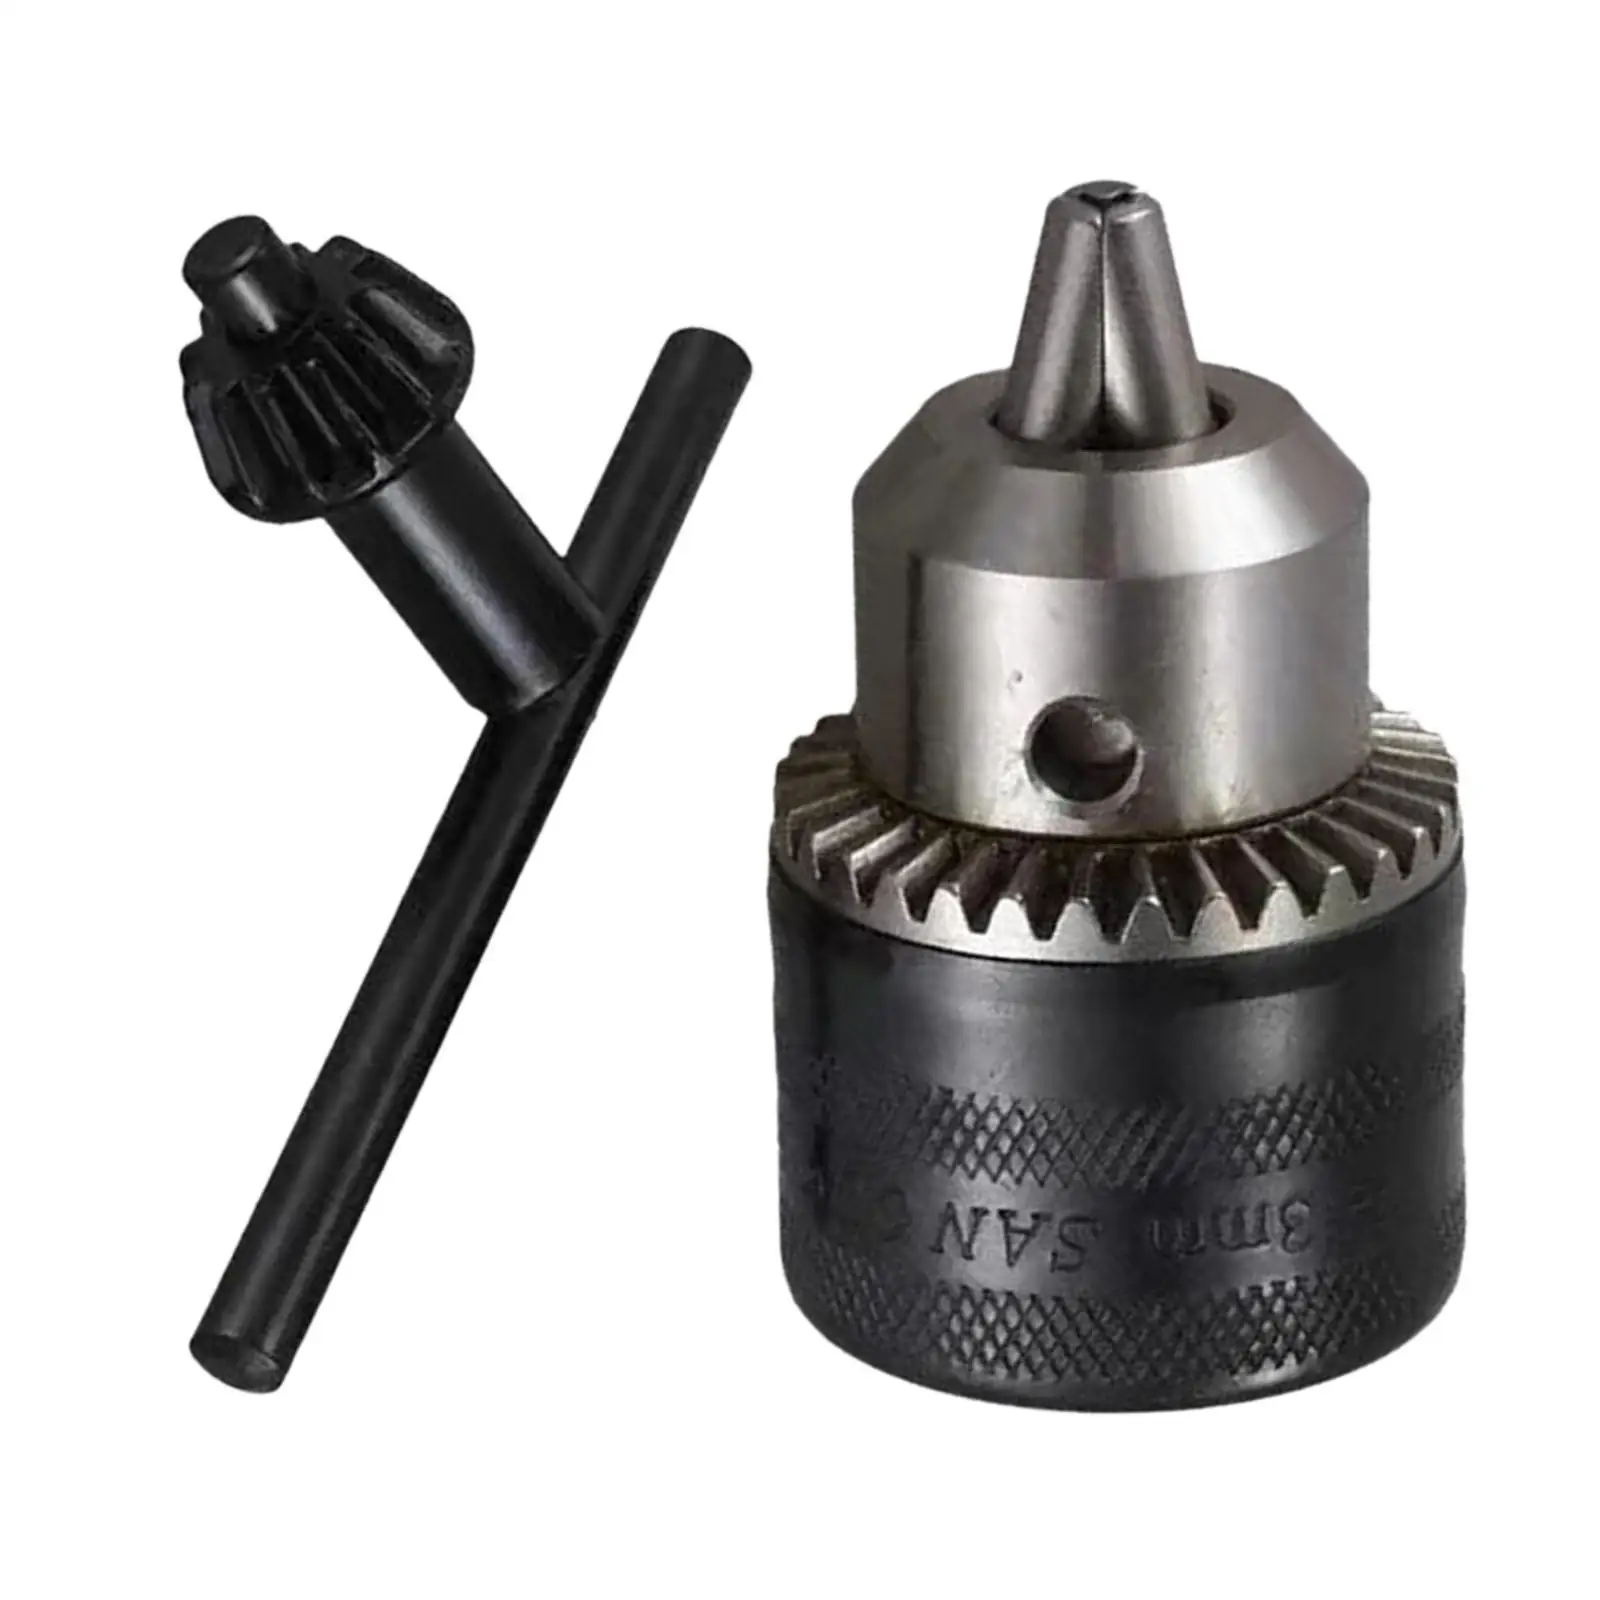 1.5-13mm Drill Chuck B16 Tapered Bore Drill Chuck Heavy Duty Sturdy Socket Adapter for Electric Drill Clamping 1/2